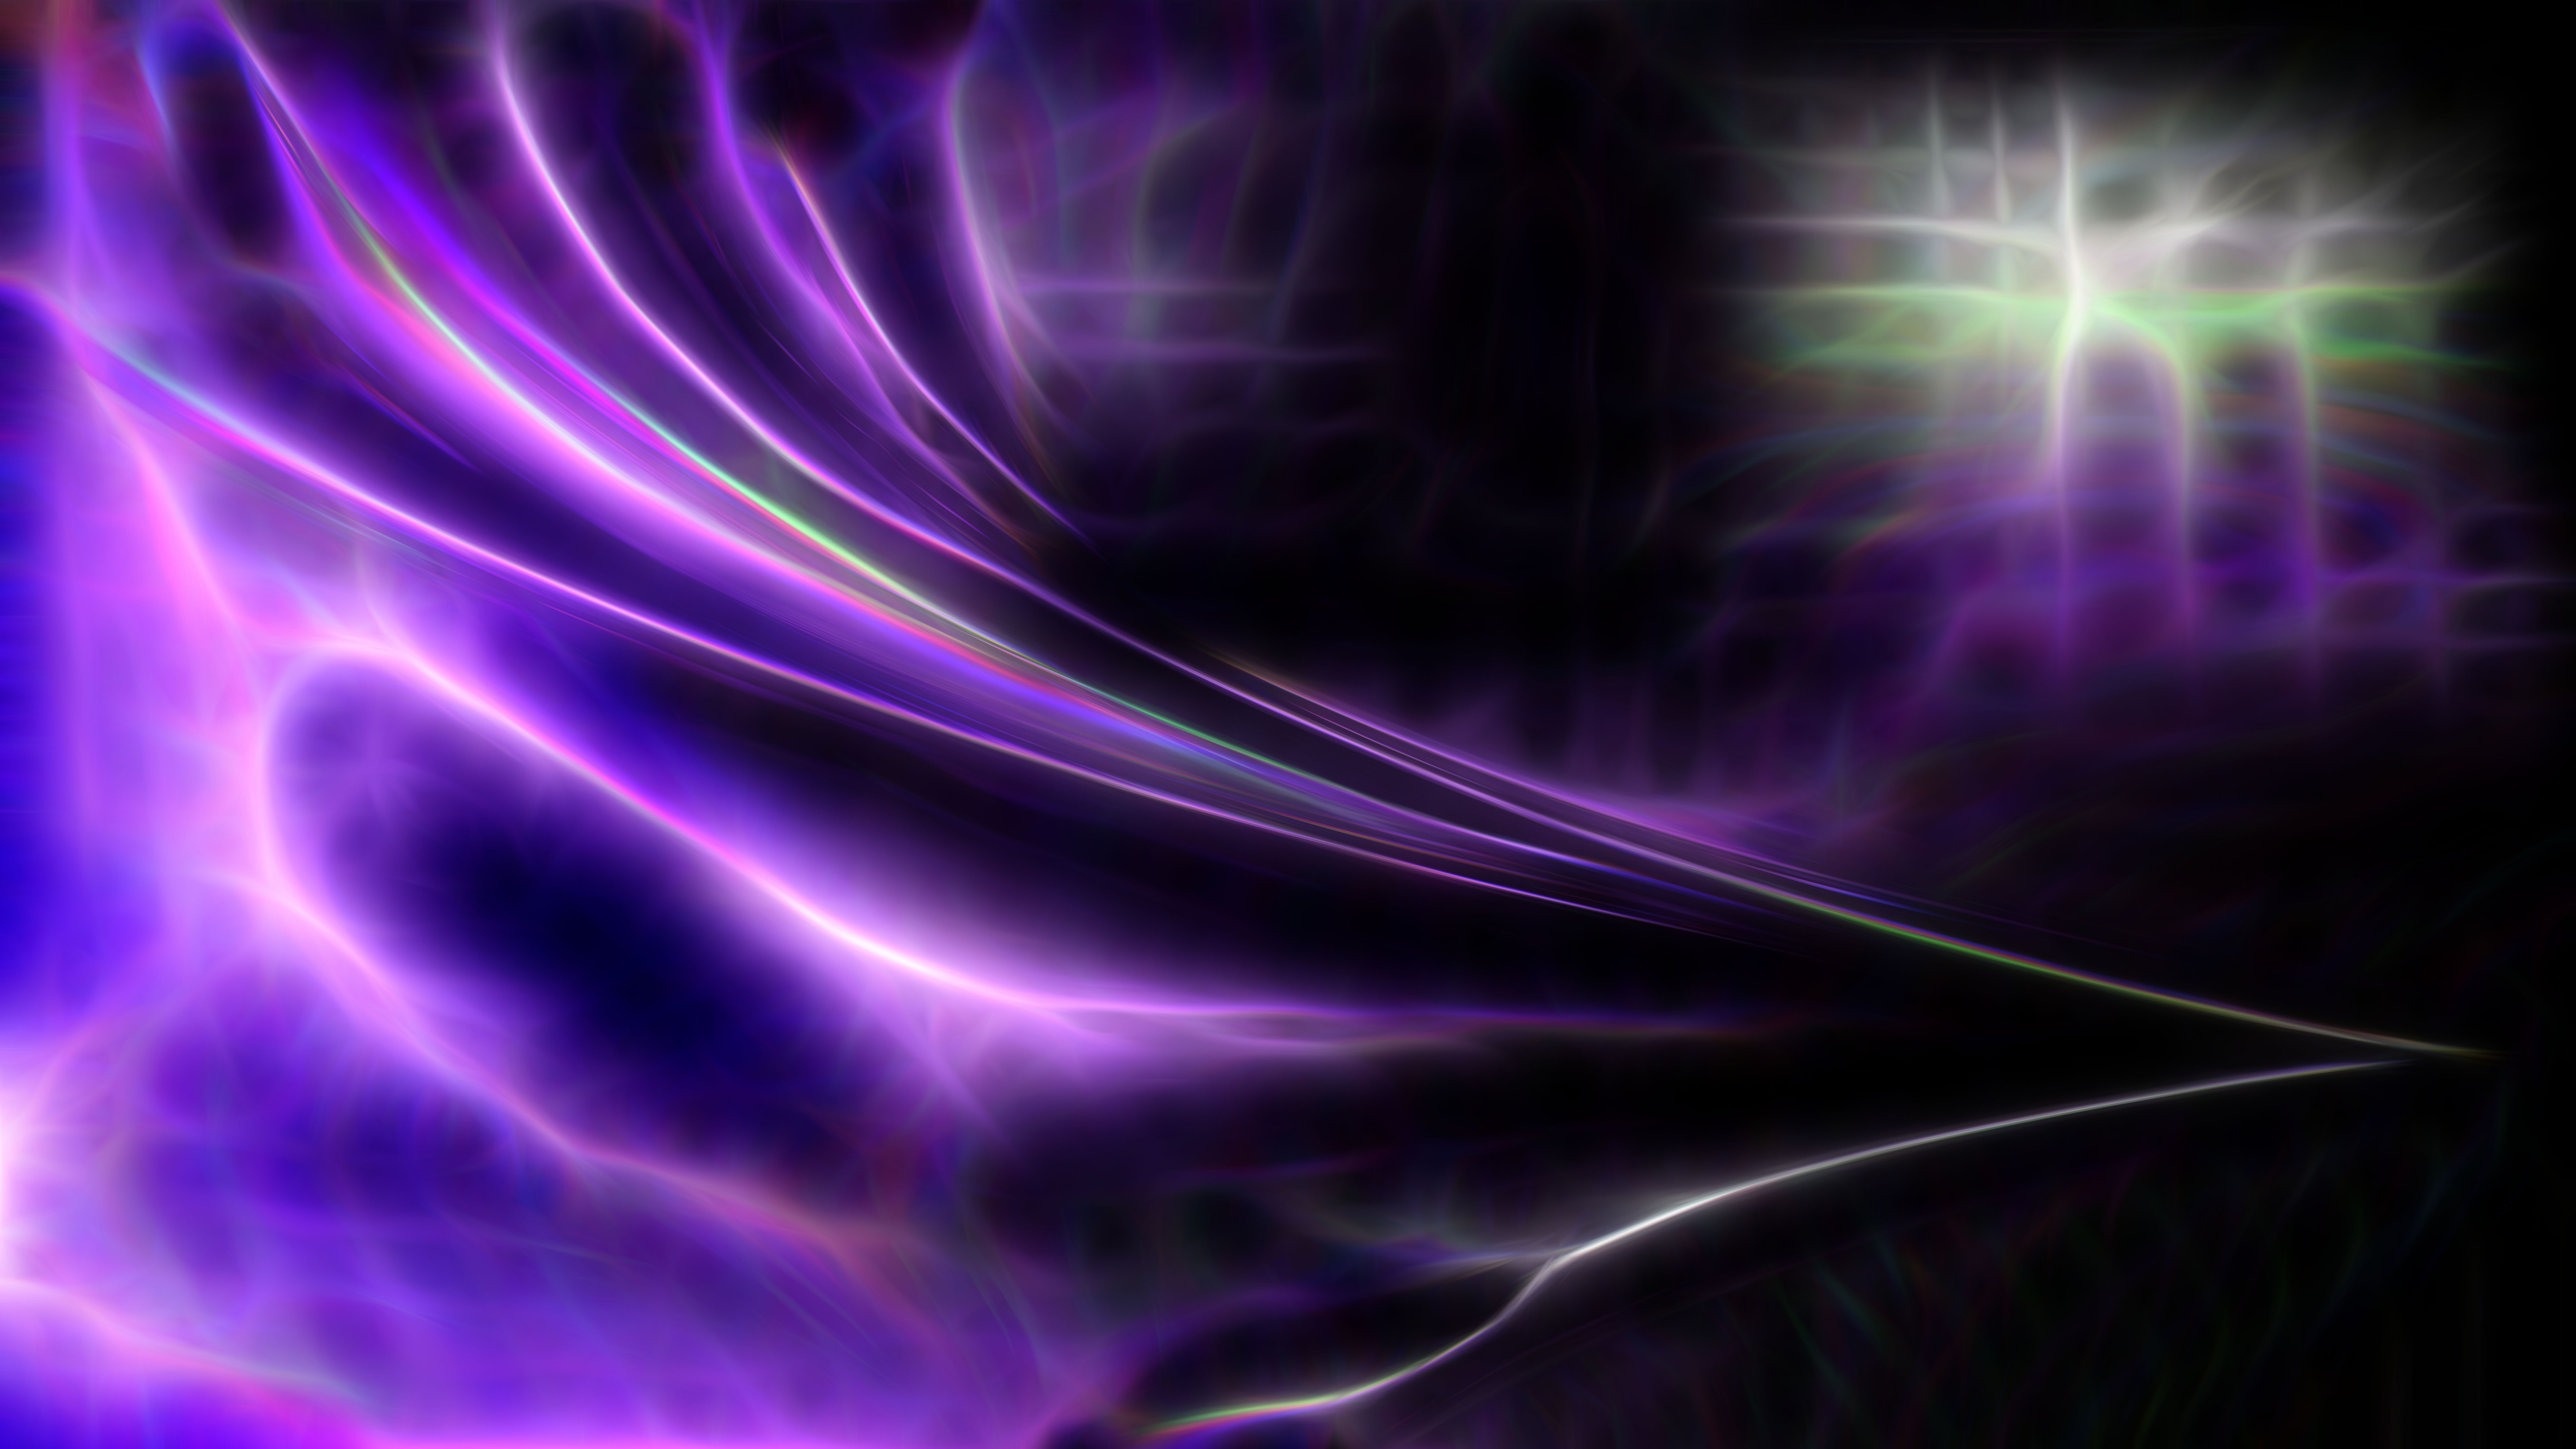 Free Abstract Purple and Black Texture Background Design